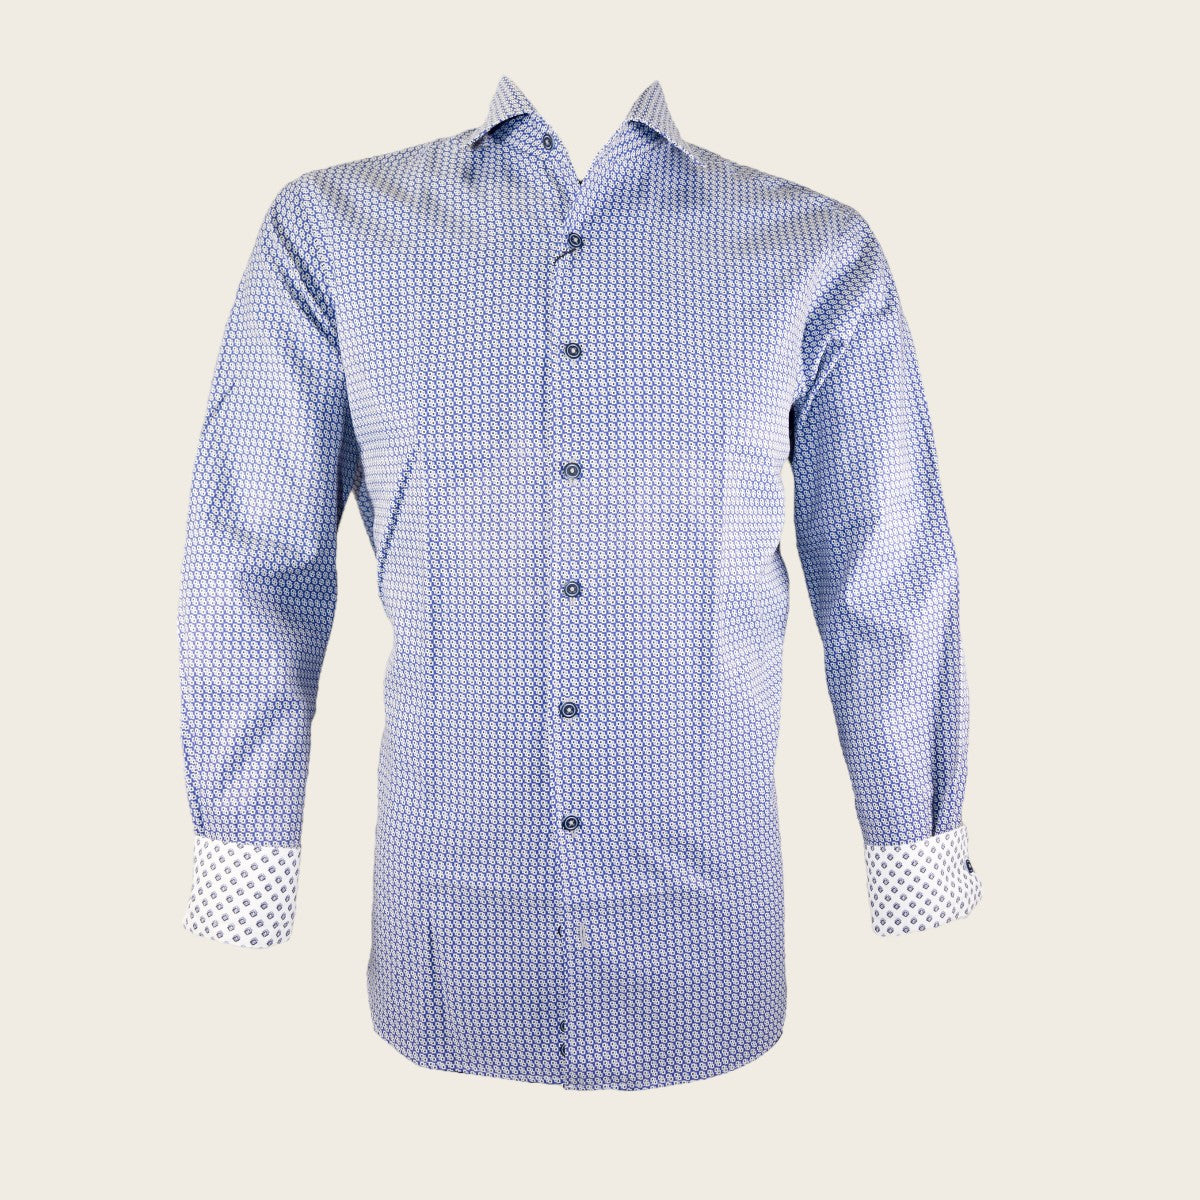 Blue print men shirt, long sleeves and adorned with button-down front and cuff closures.